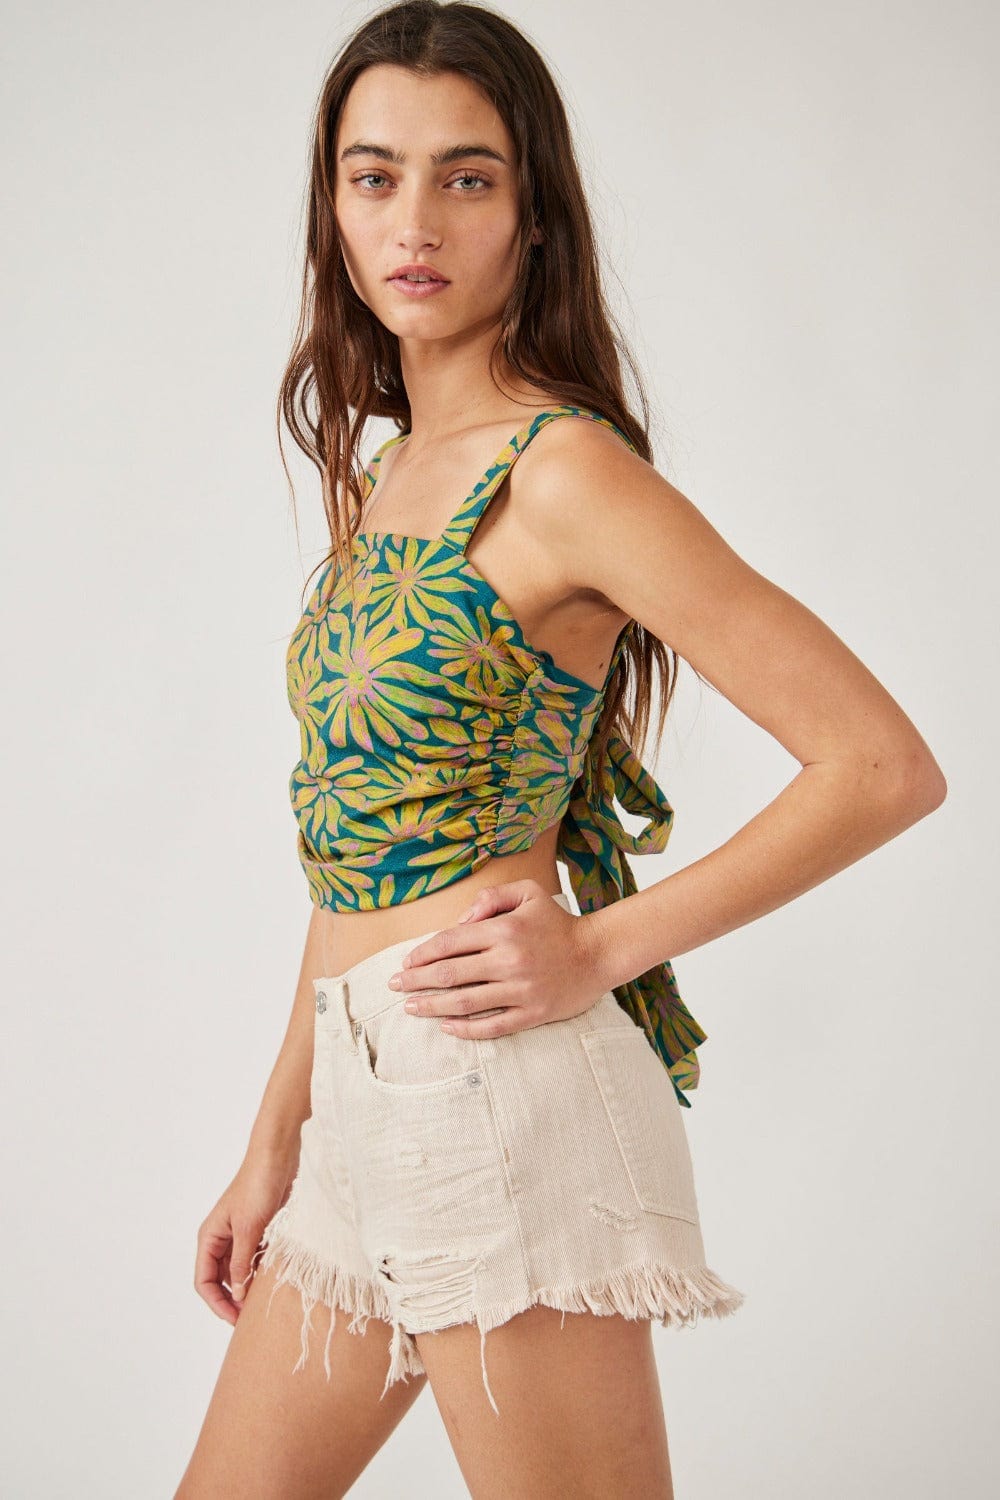 Free People All Tied Up Top